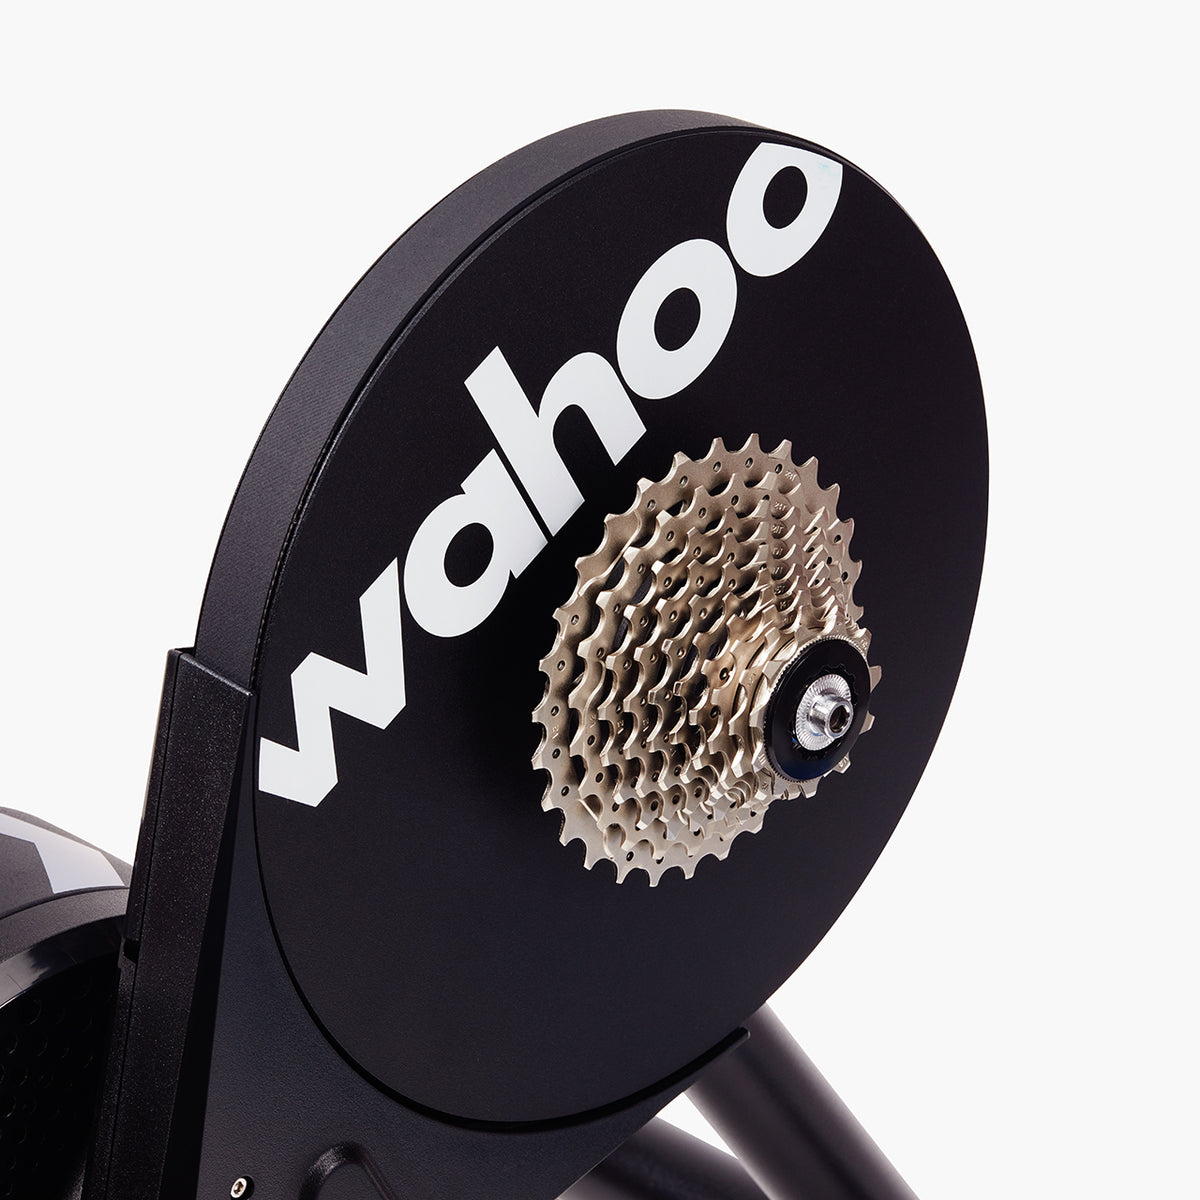 Wahoo KICKR CORE with 10-speed cassette